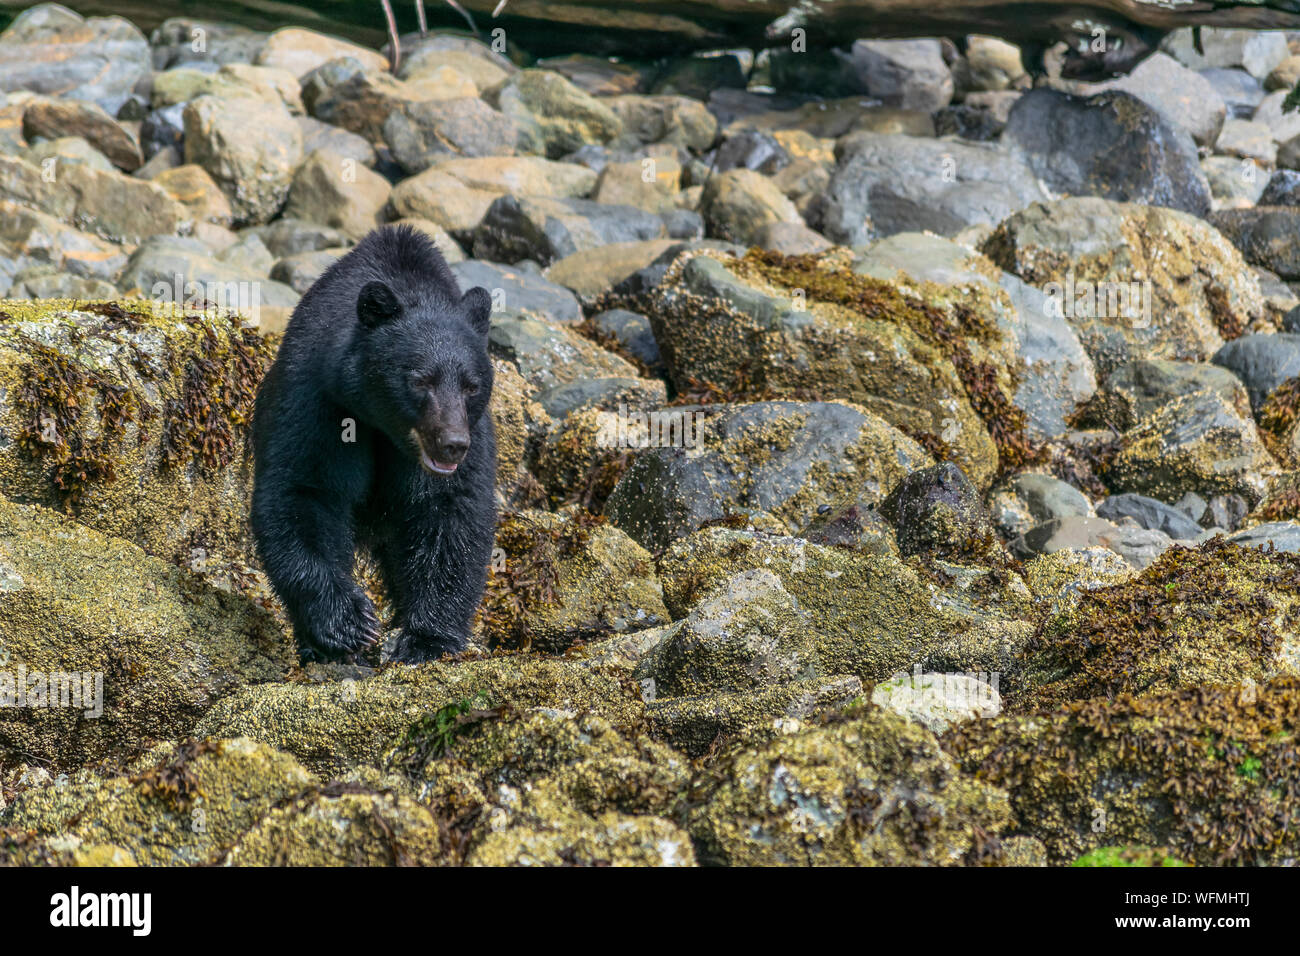 A thriving population of black bears is found on Vancouver Island, British Columbia.  Visitors can view bears on boat tours from the town of Tofino. Stock Photo